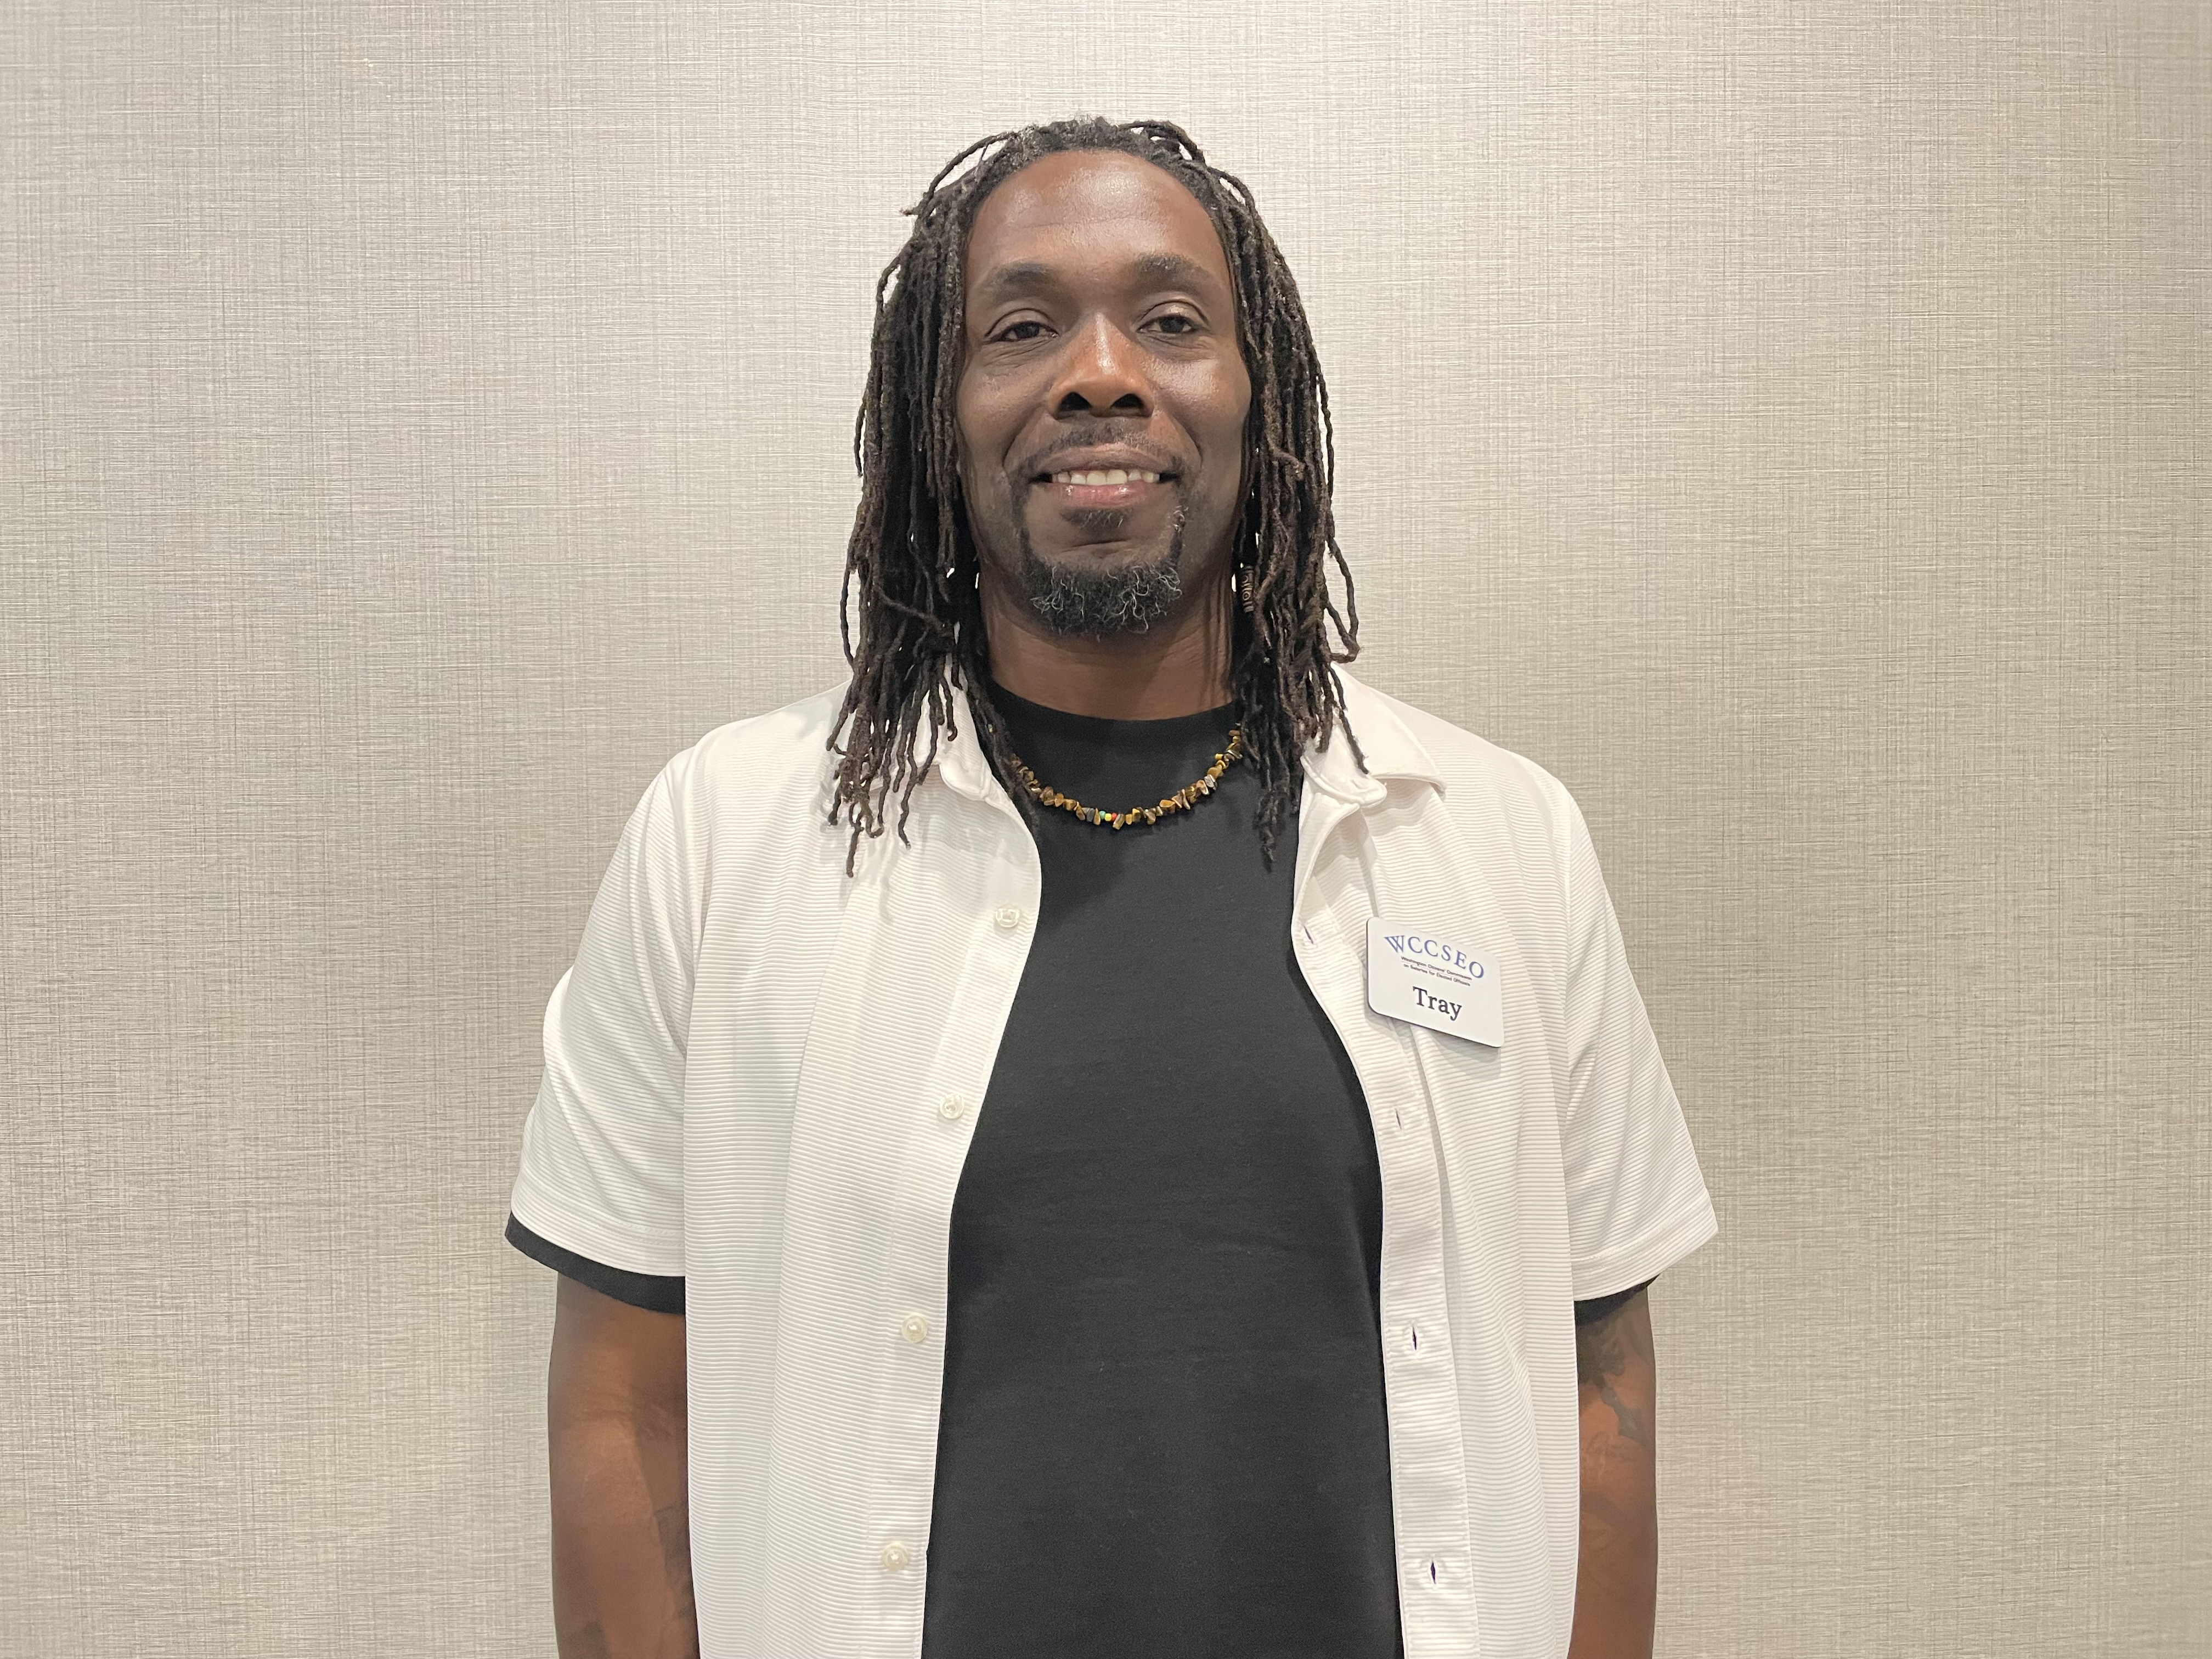 Tray, black male, shoulder length thin dreaded hair, dark complexion, with a bright smile, wearing a black under shirt and white button up